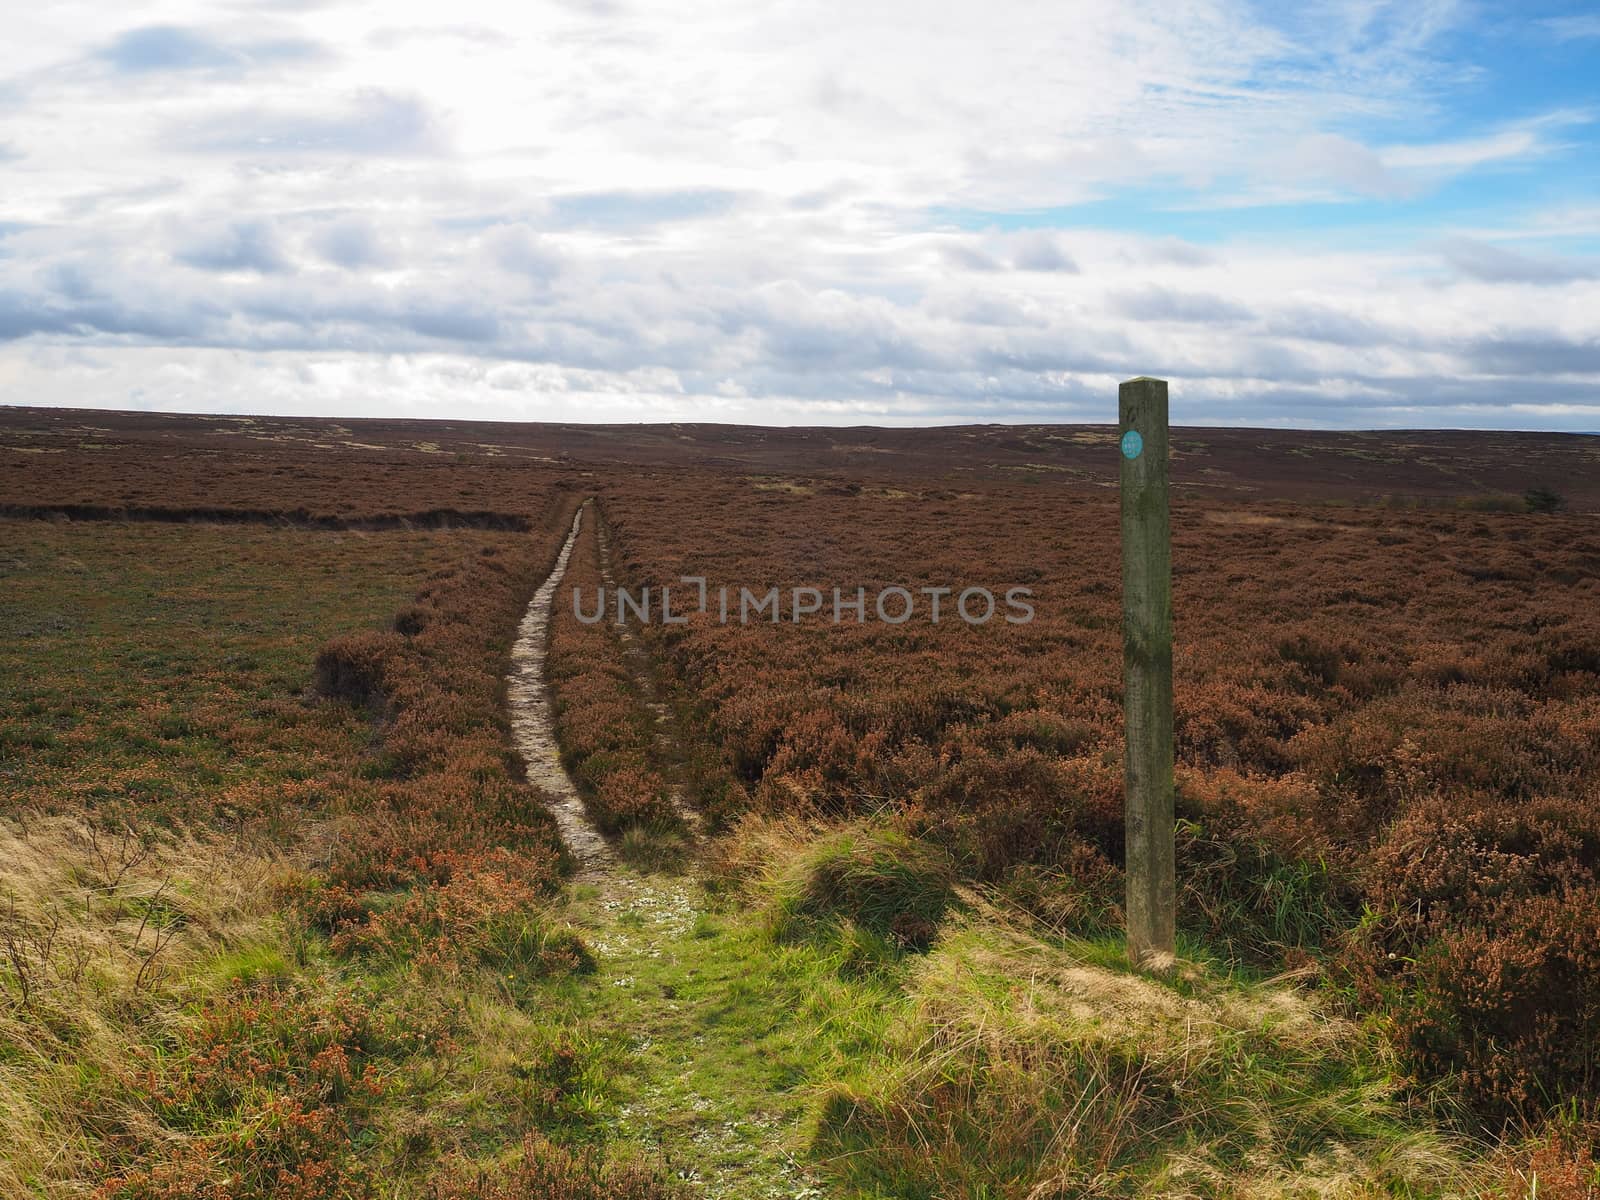 Footpath with marker post leading across Brow Moor in the North York Moors National Park, Yorkshire, UK